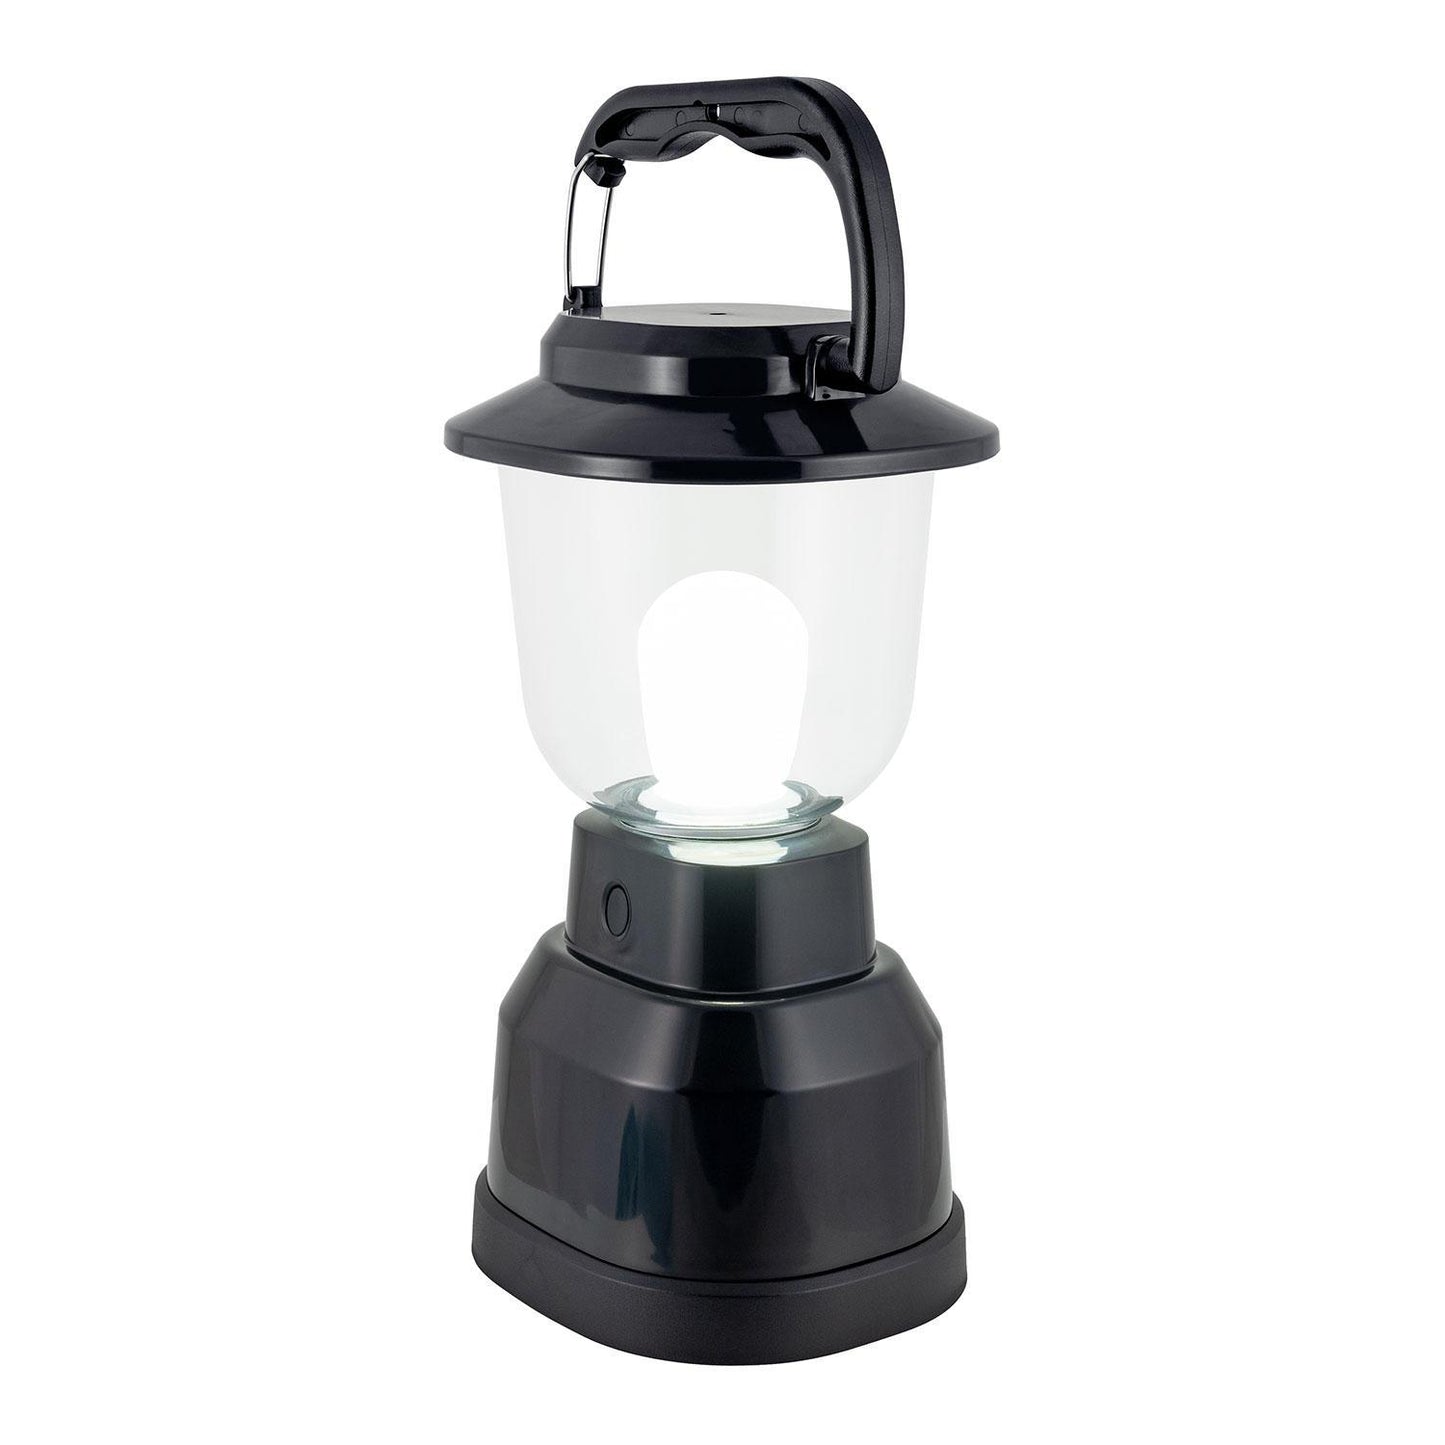 EcoScapes Dual Power LED Rechargeable Dimmable Lantern Black